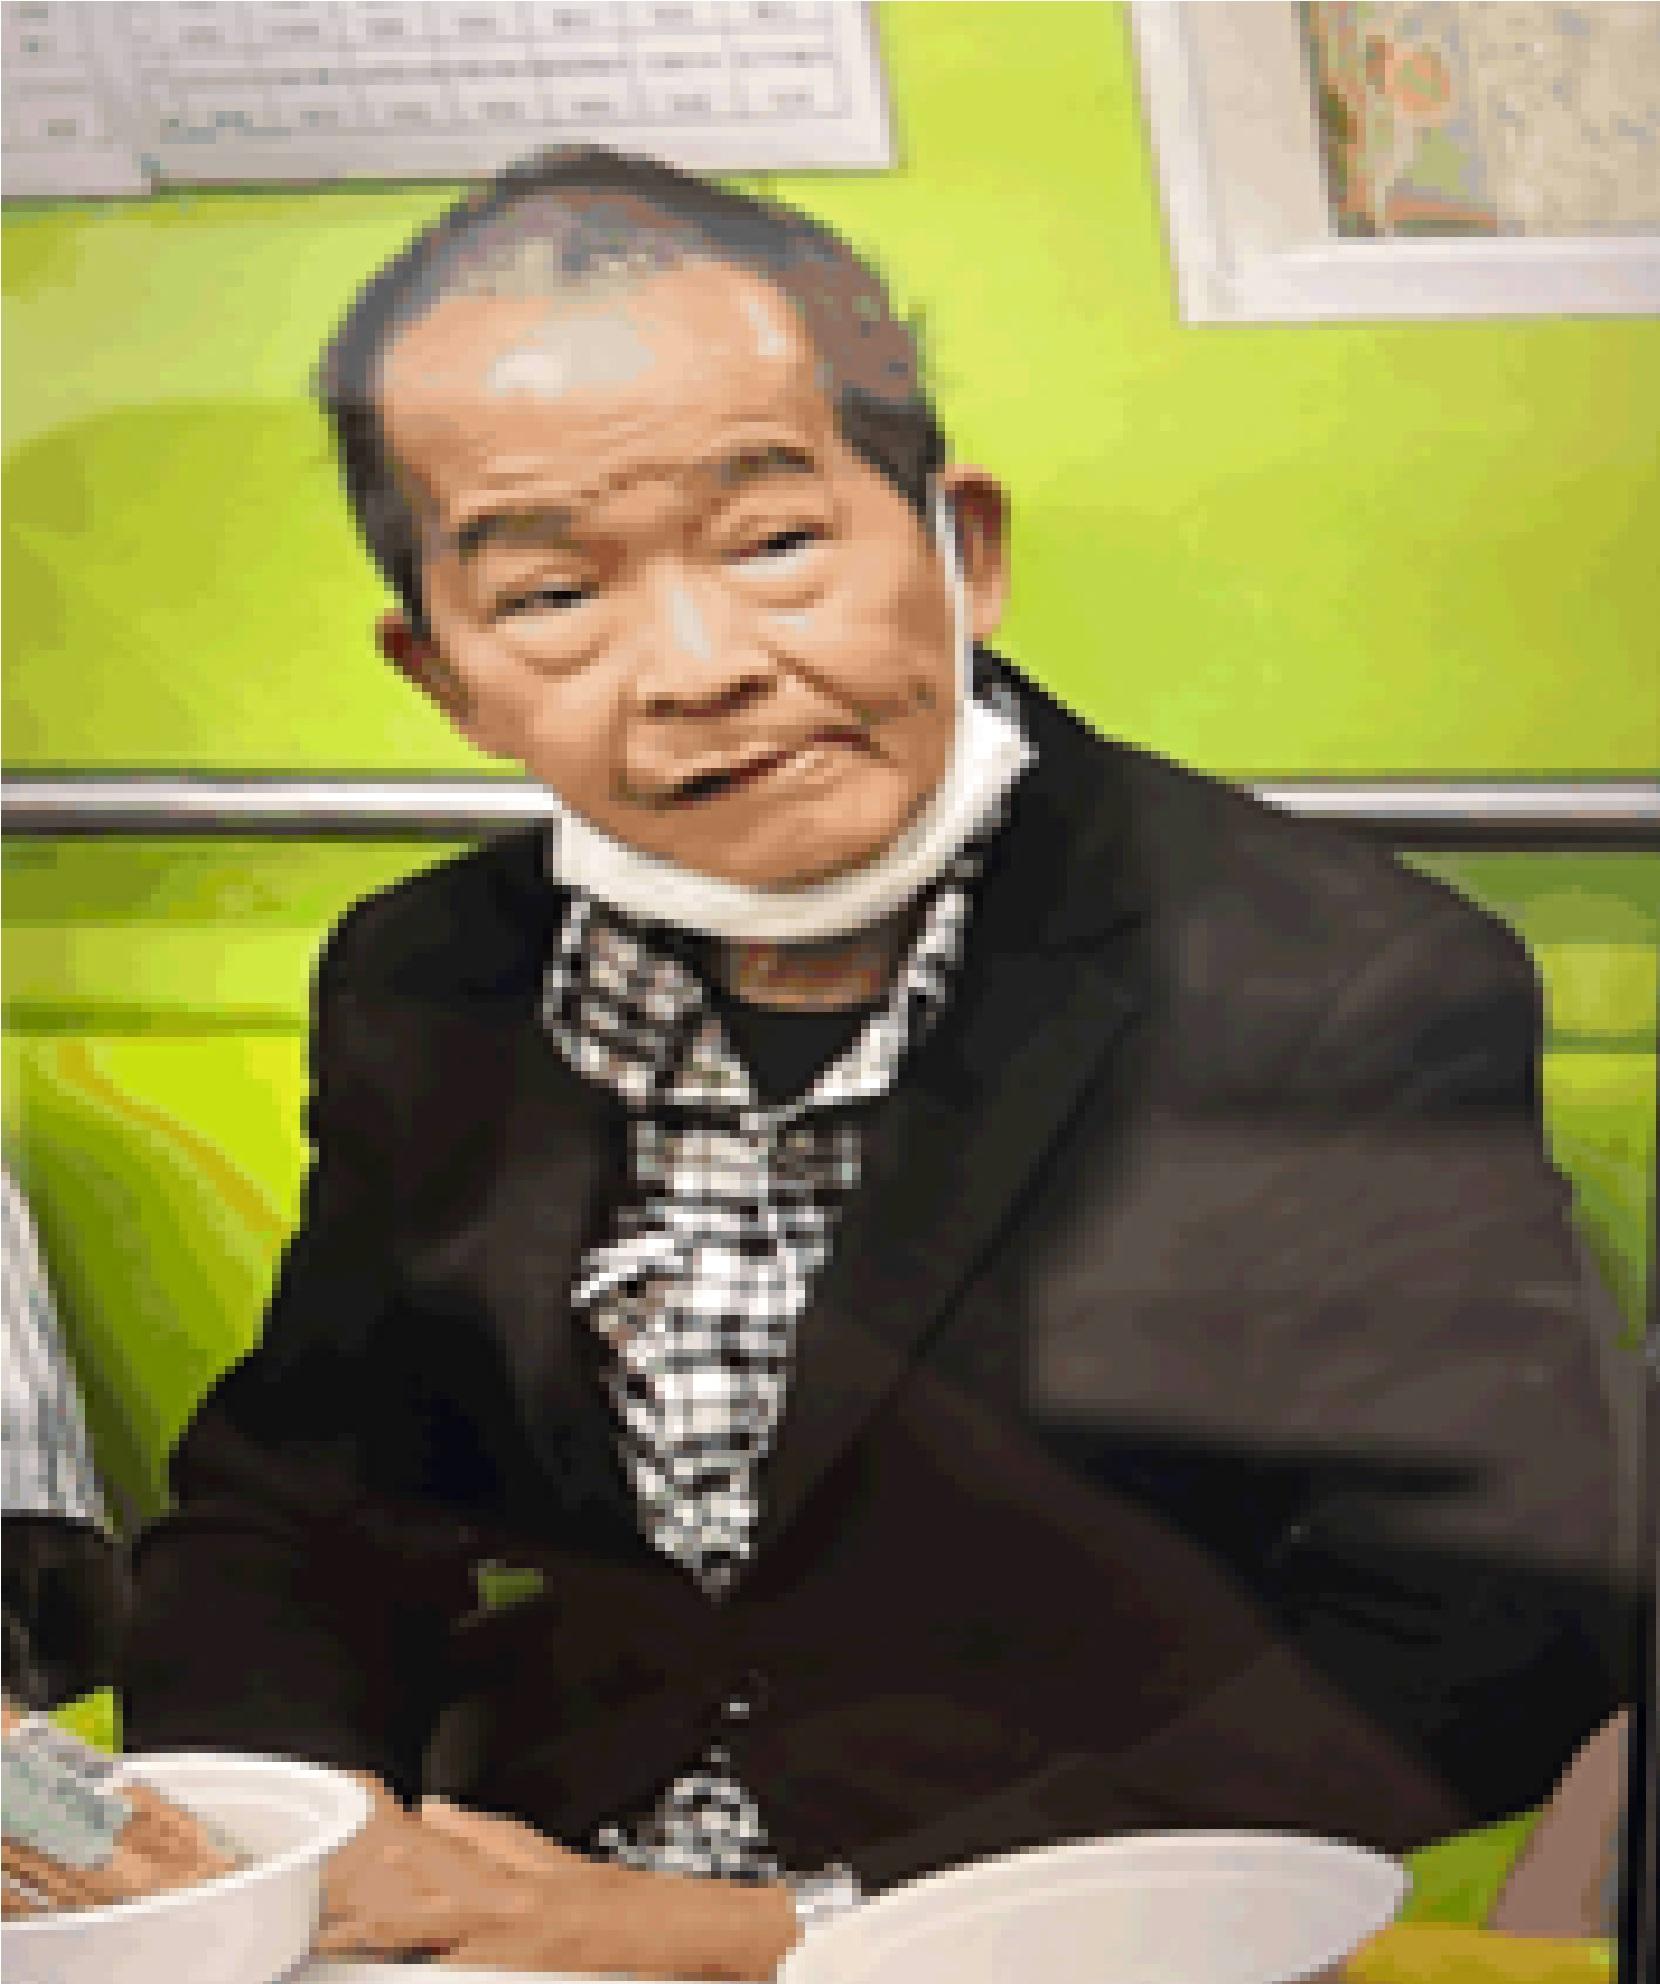 Li Kan-sin, aged 72, is about 1.68 metres tall, 60 kilograms in weight and of medium build. He has a round face with yellow complexion and short white hair. He was last seen wearing a black jacket, a black plaid shirt, grey trousers, grey slippers and a blue mask.